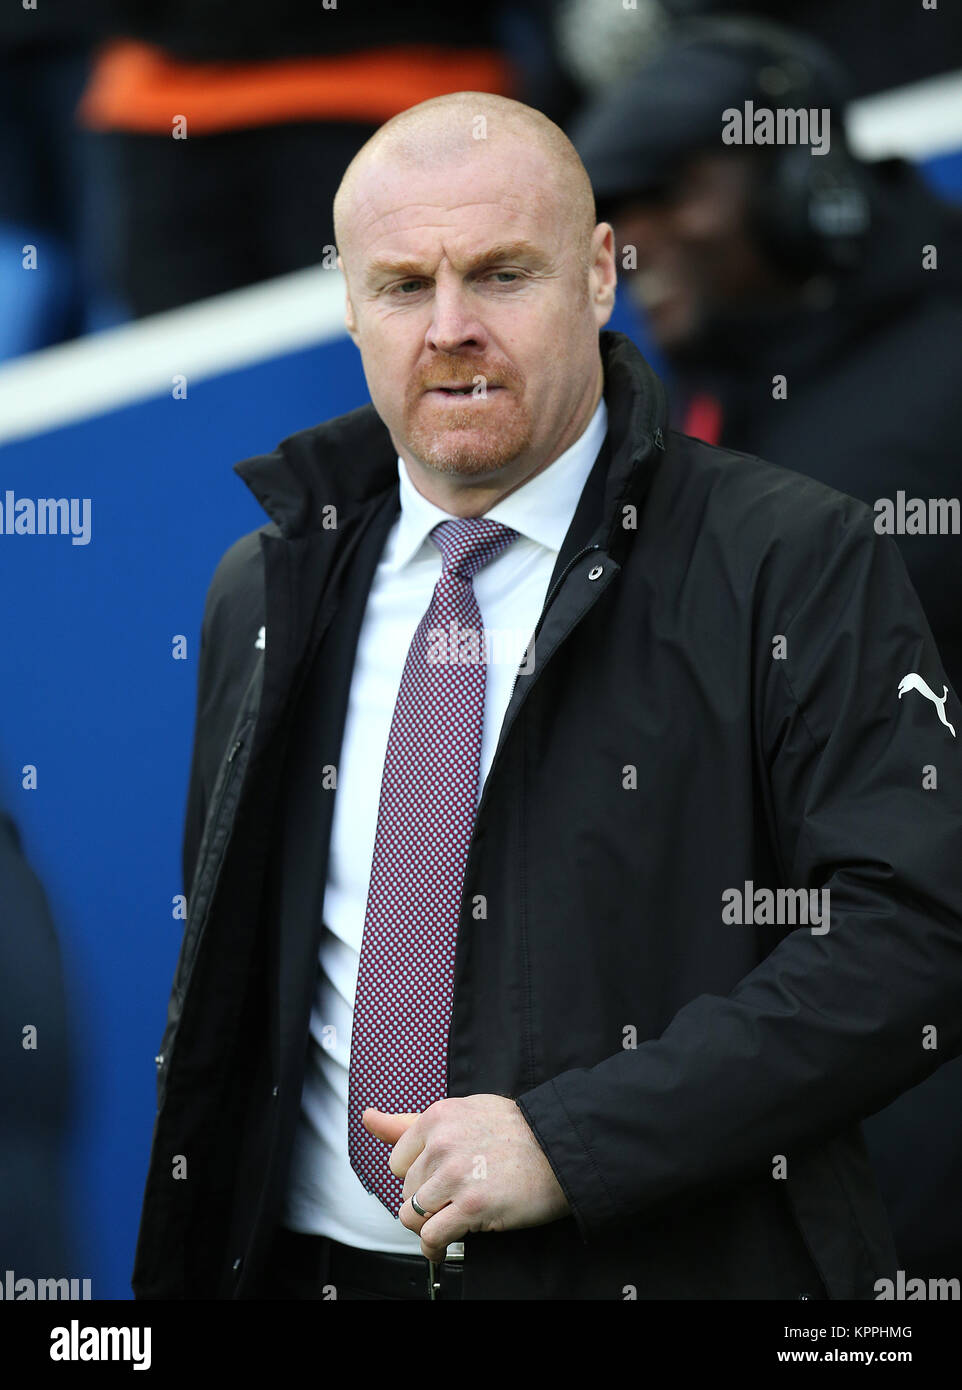 Burnley manager Sean Dyche during the Premier League match at the AMEX Stadium, Brighton. PRESS ASSOCIATION Photo. Picture date: Saturday December 16, 2017. See PA story SOCCER Brighton. Photo credit should read: Gareth Fuller/PA Wire. RESTRICTIONS: No use with unauthorised audio, video, data, fixture lists, club/league logos or 'live' services. Online in-match use limited to 75 images, no video emulation. No use in betting, games or single club/league/player publications. Stock Photo